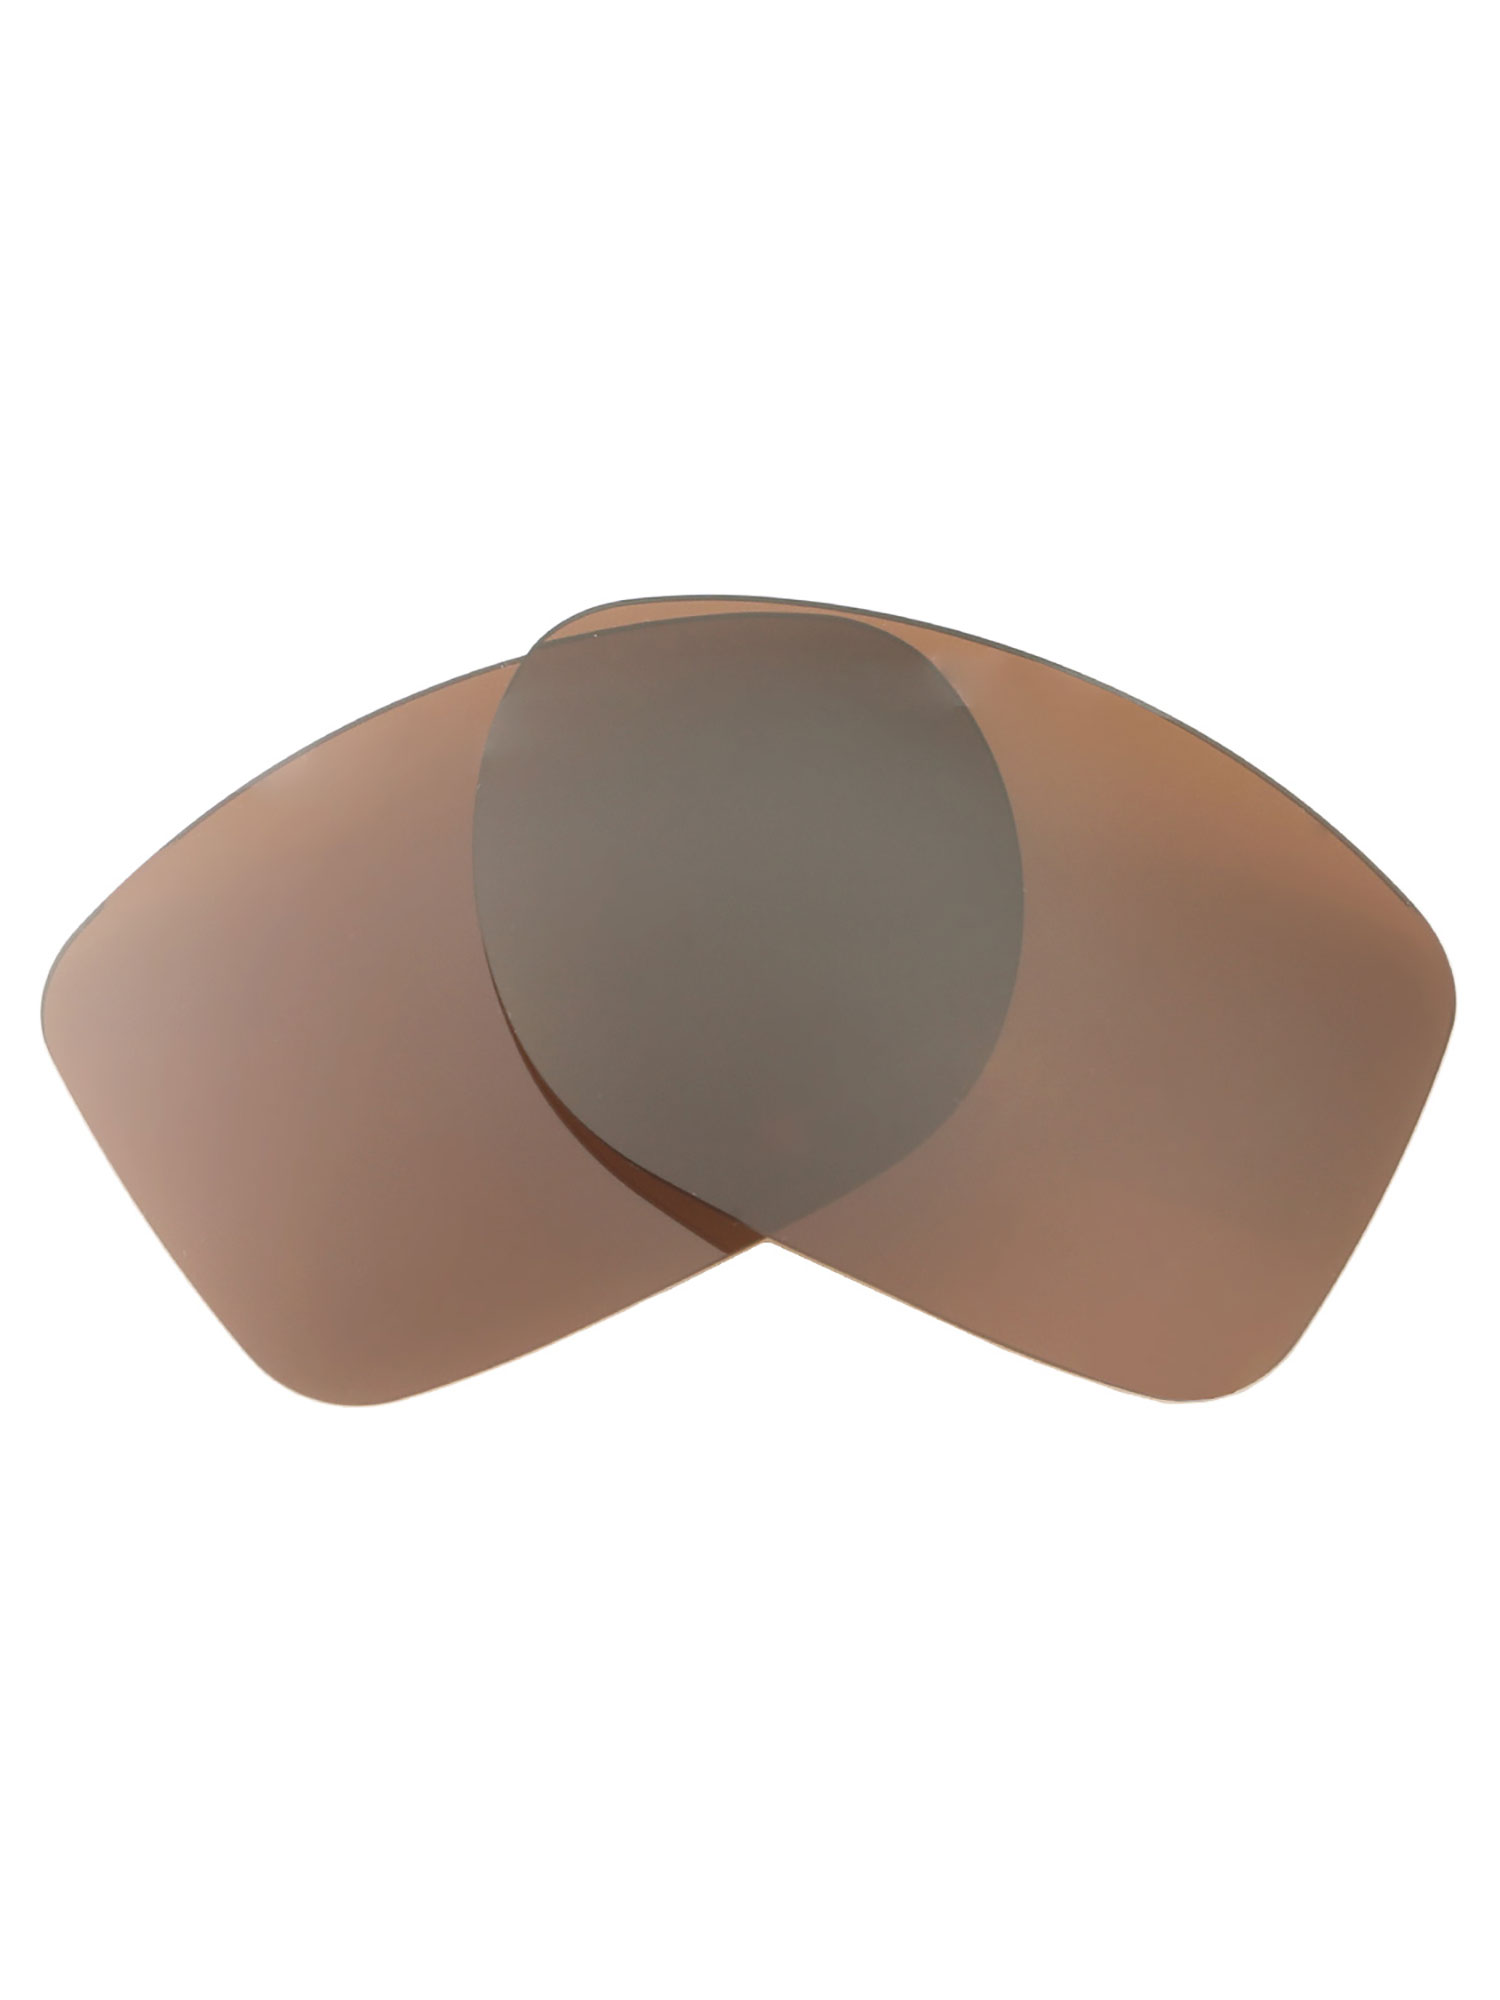 Walleva Brown Polarized Replacement Lenses for Oakley Gauge 8 M Sunglasses - image 2 of 7